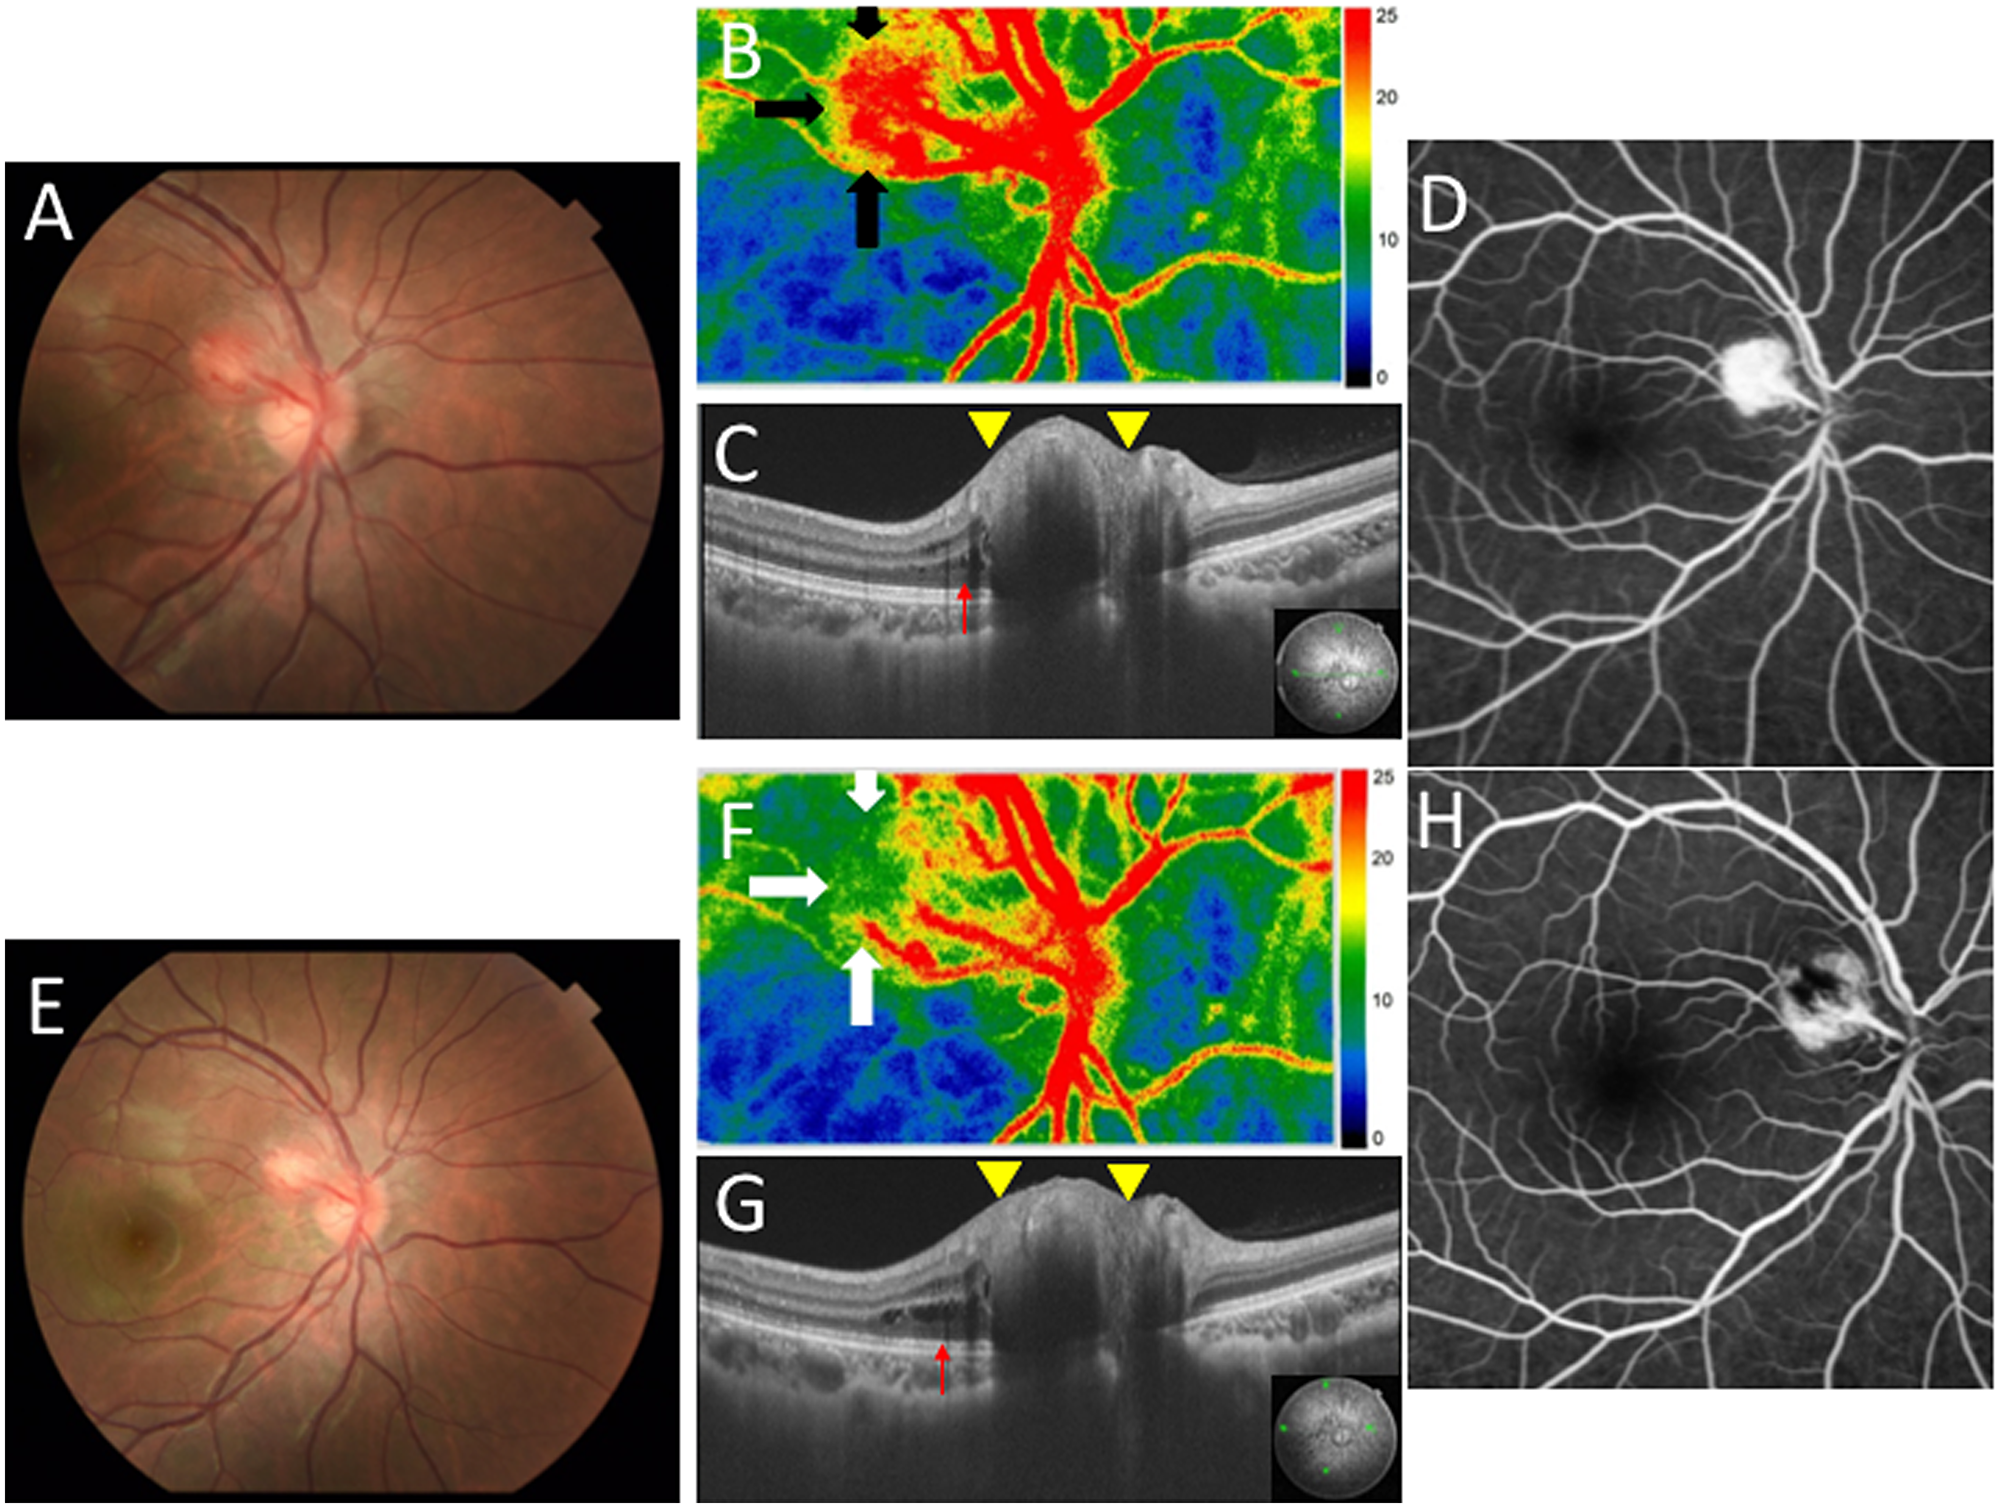 Ophthalmic findings before and after laser photocoagulation (LPC) in the present case with JRCH in the right eye.